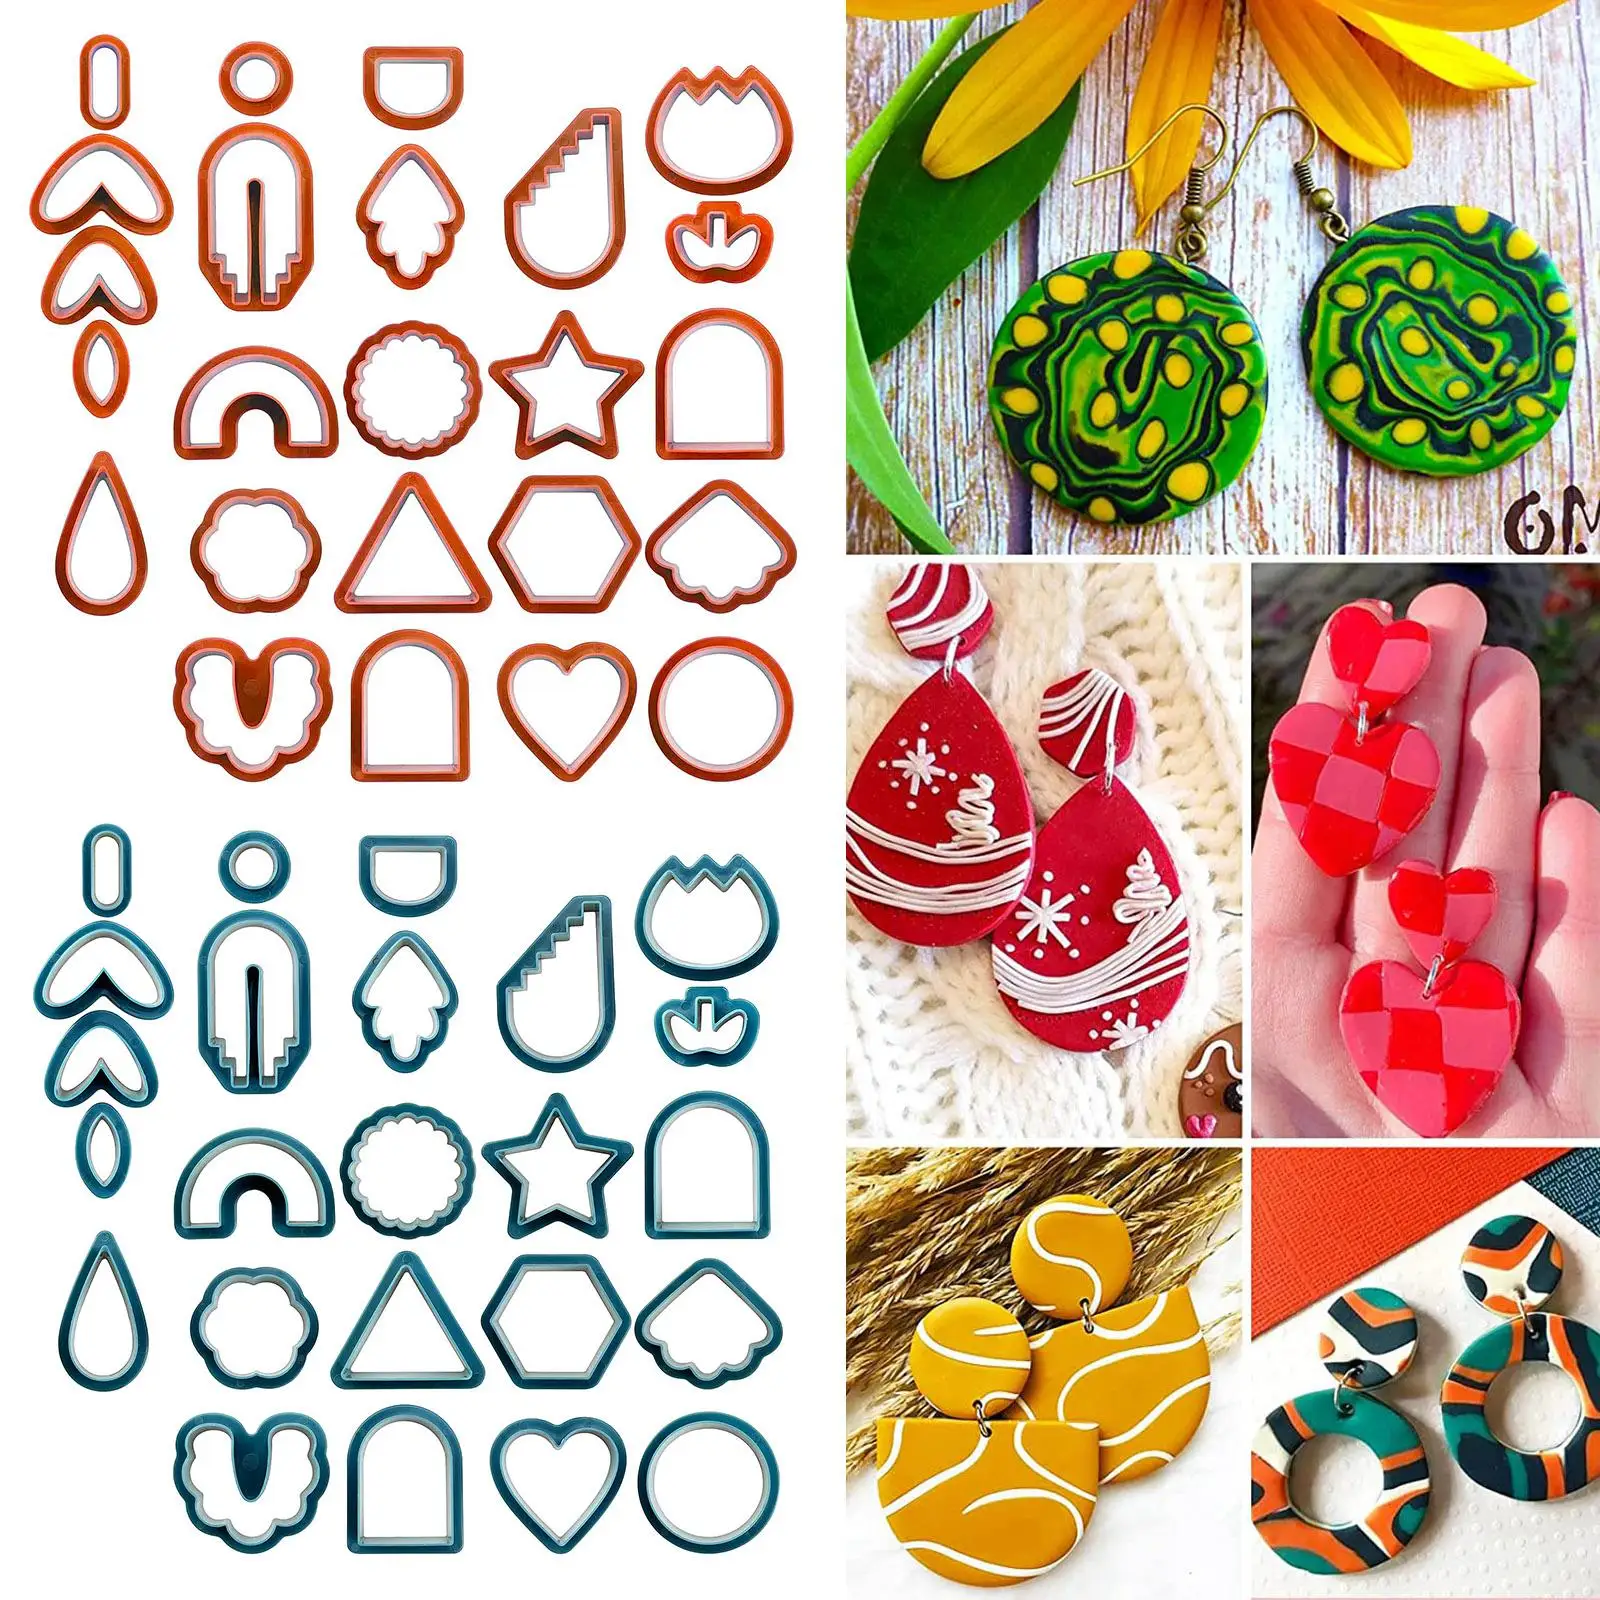 24Pcs Polymer Clay Cutter Set Earrings Different Shapes Jewelry Making Crafts DIY Polymer Clay Jewelry Kids Clay Cutting Tools